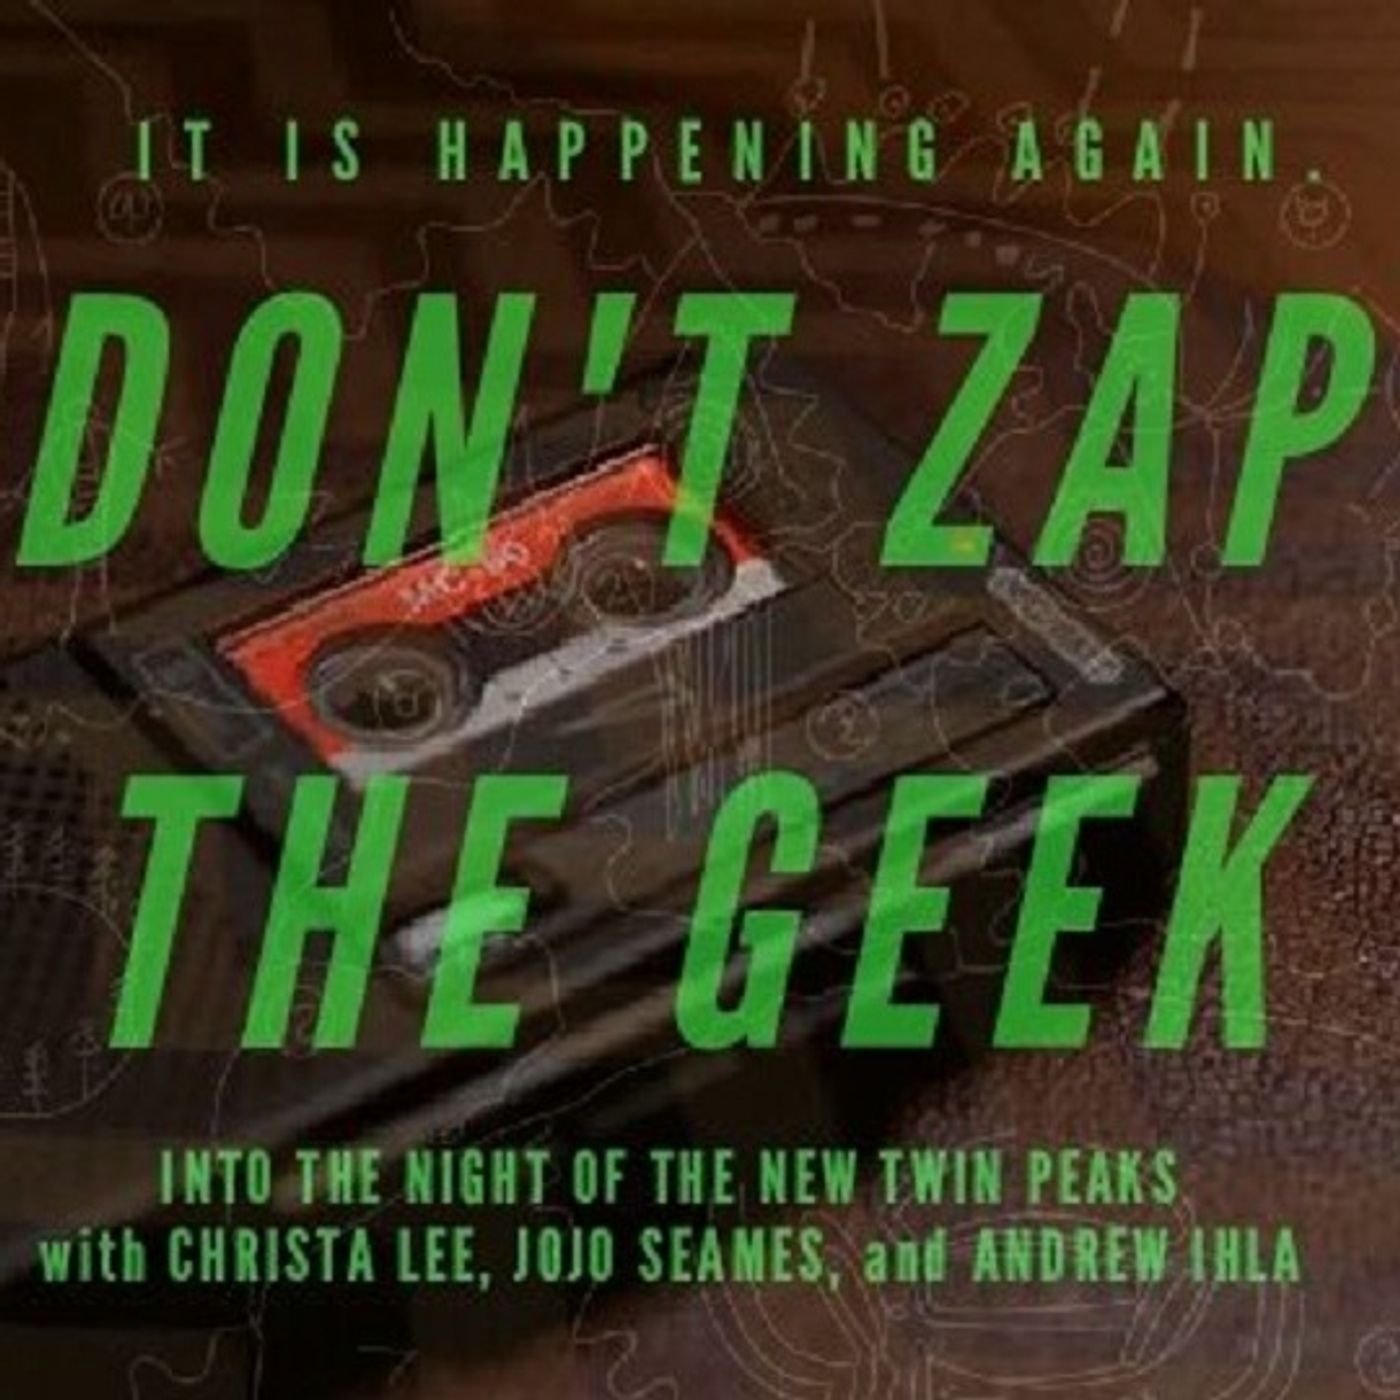 Don't Zap The Geek!